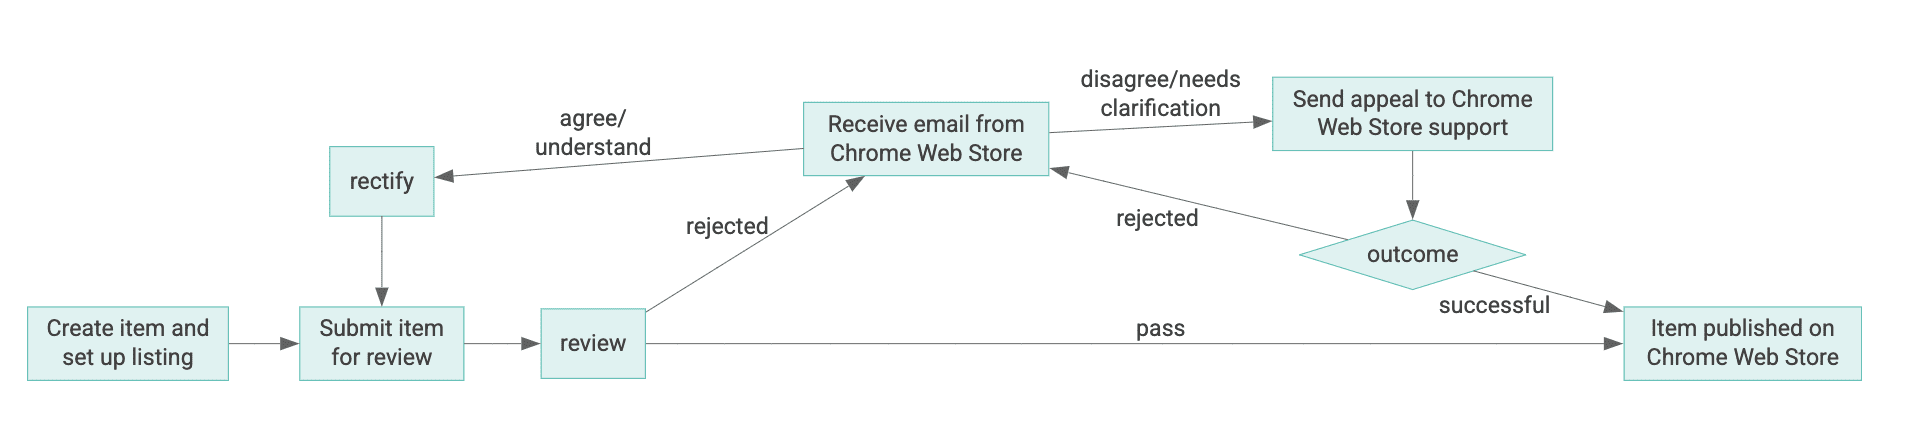 Diagram of the lifecycle of a Chrome Web Store item